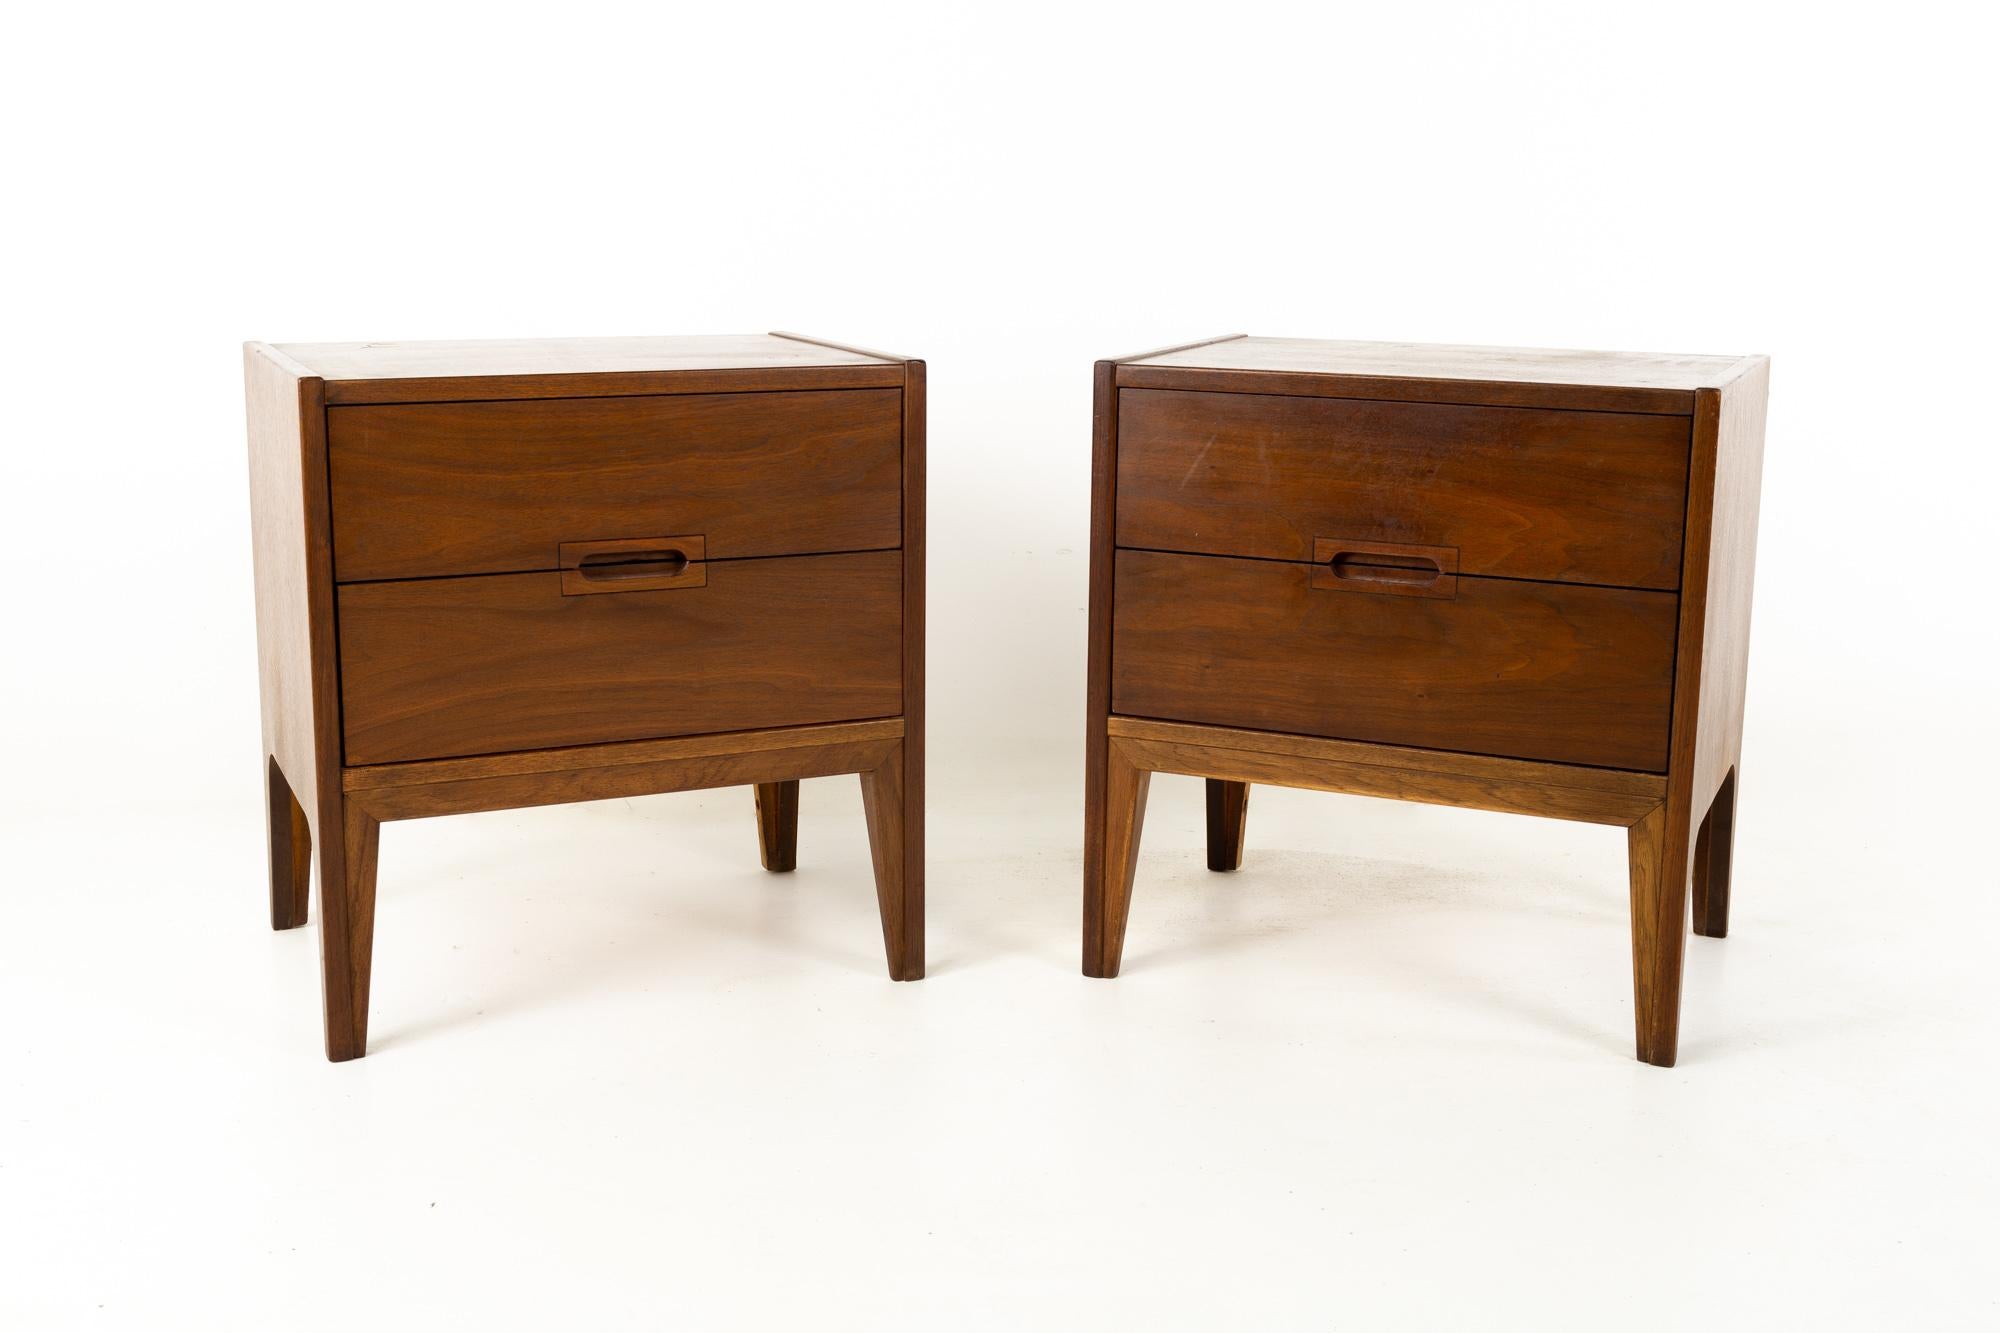 Mount Airy Janus style united midcentury walnut nightstands - Pair
These nightstands are 22 wide x 16 deep x 23.5 inches high

This price includes getting this piece in what we call restored vintage condition. That means the piece is permanently